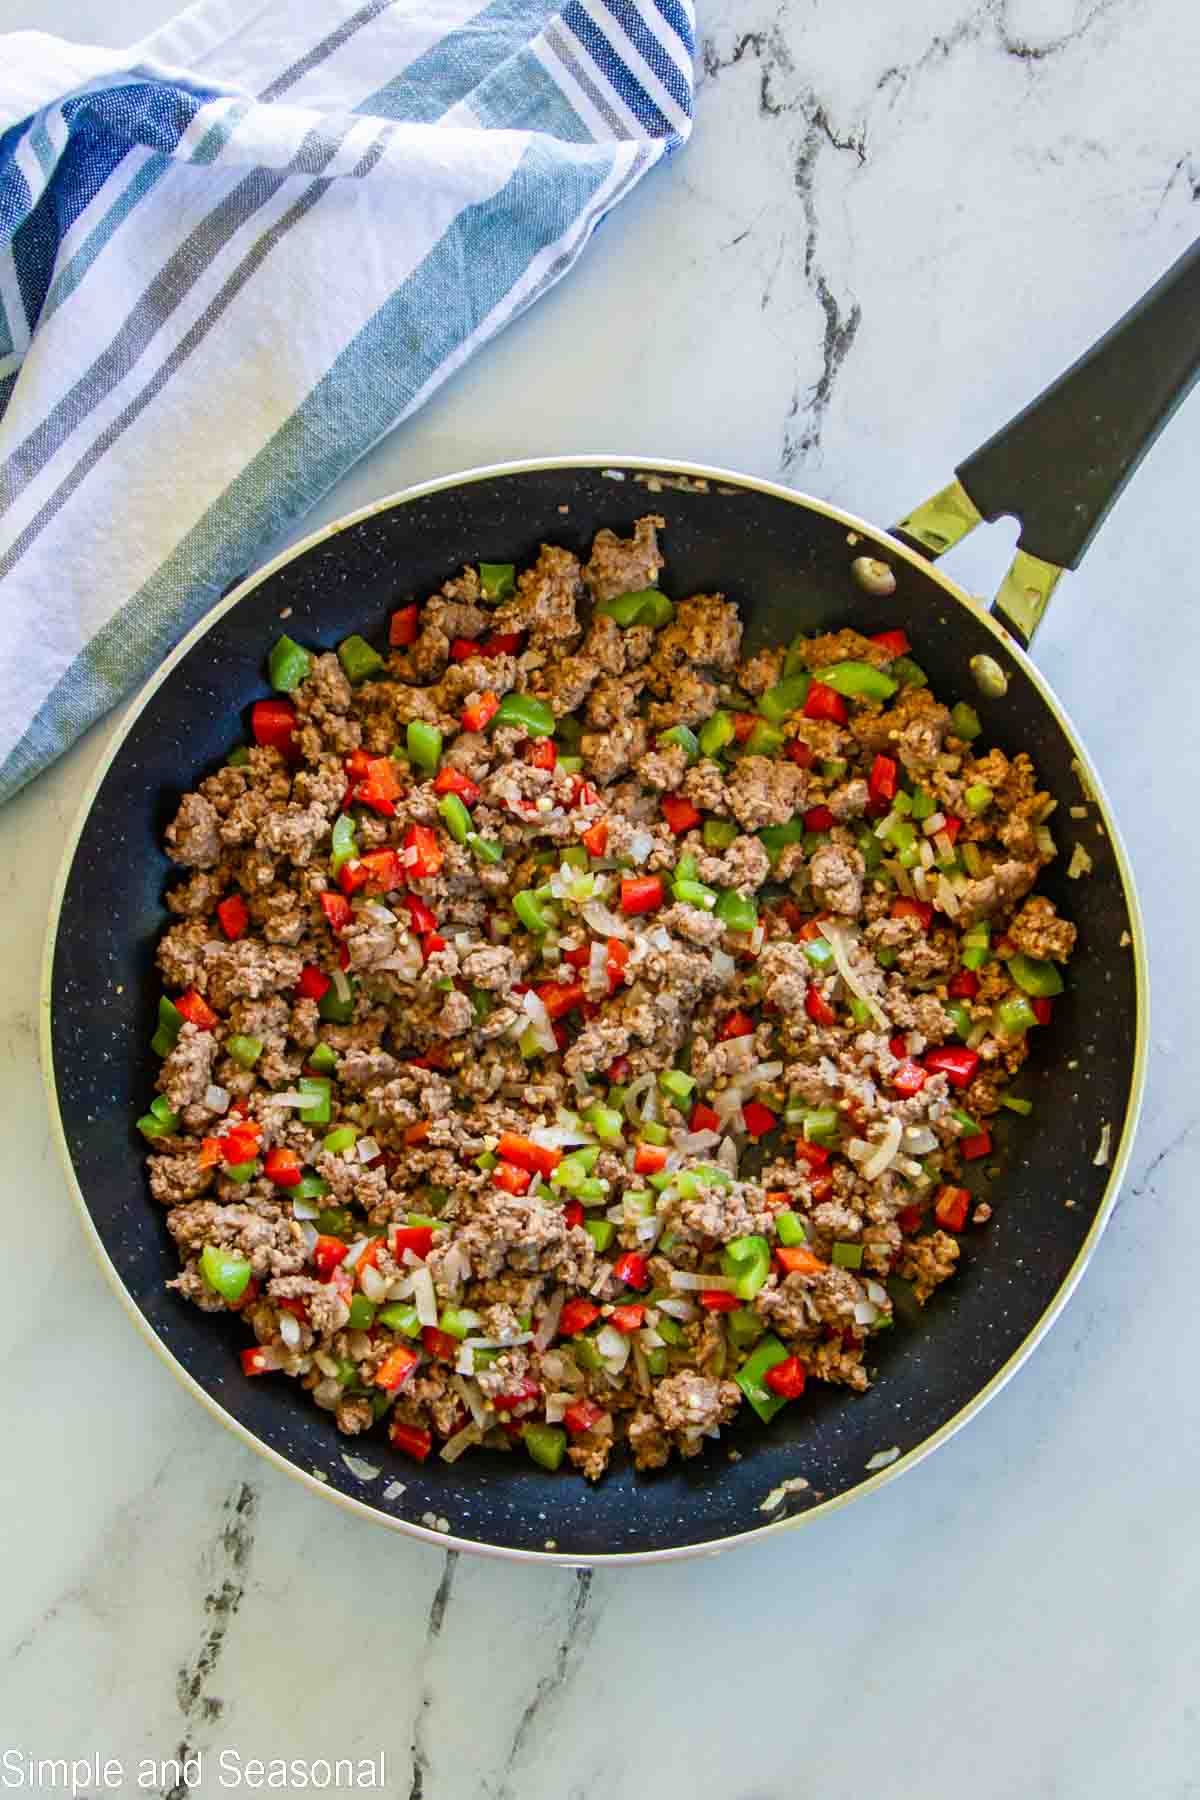 cooked vegetables and meat mixture